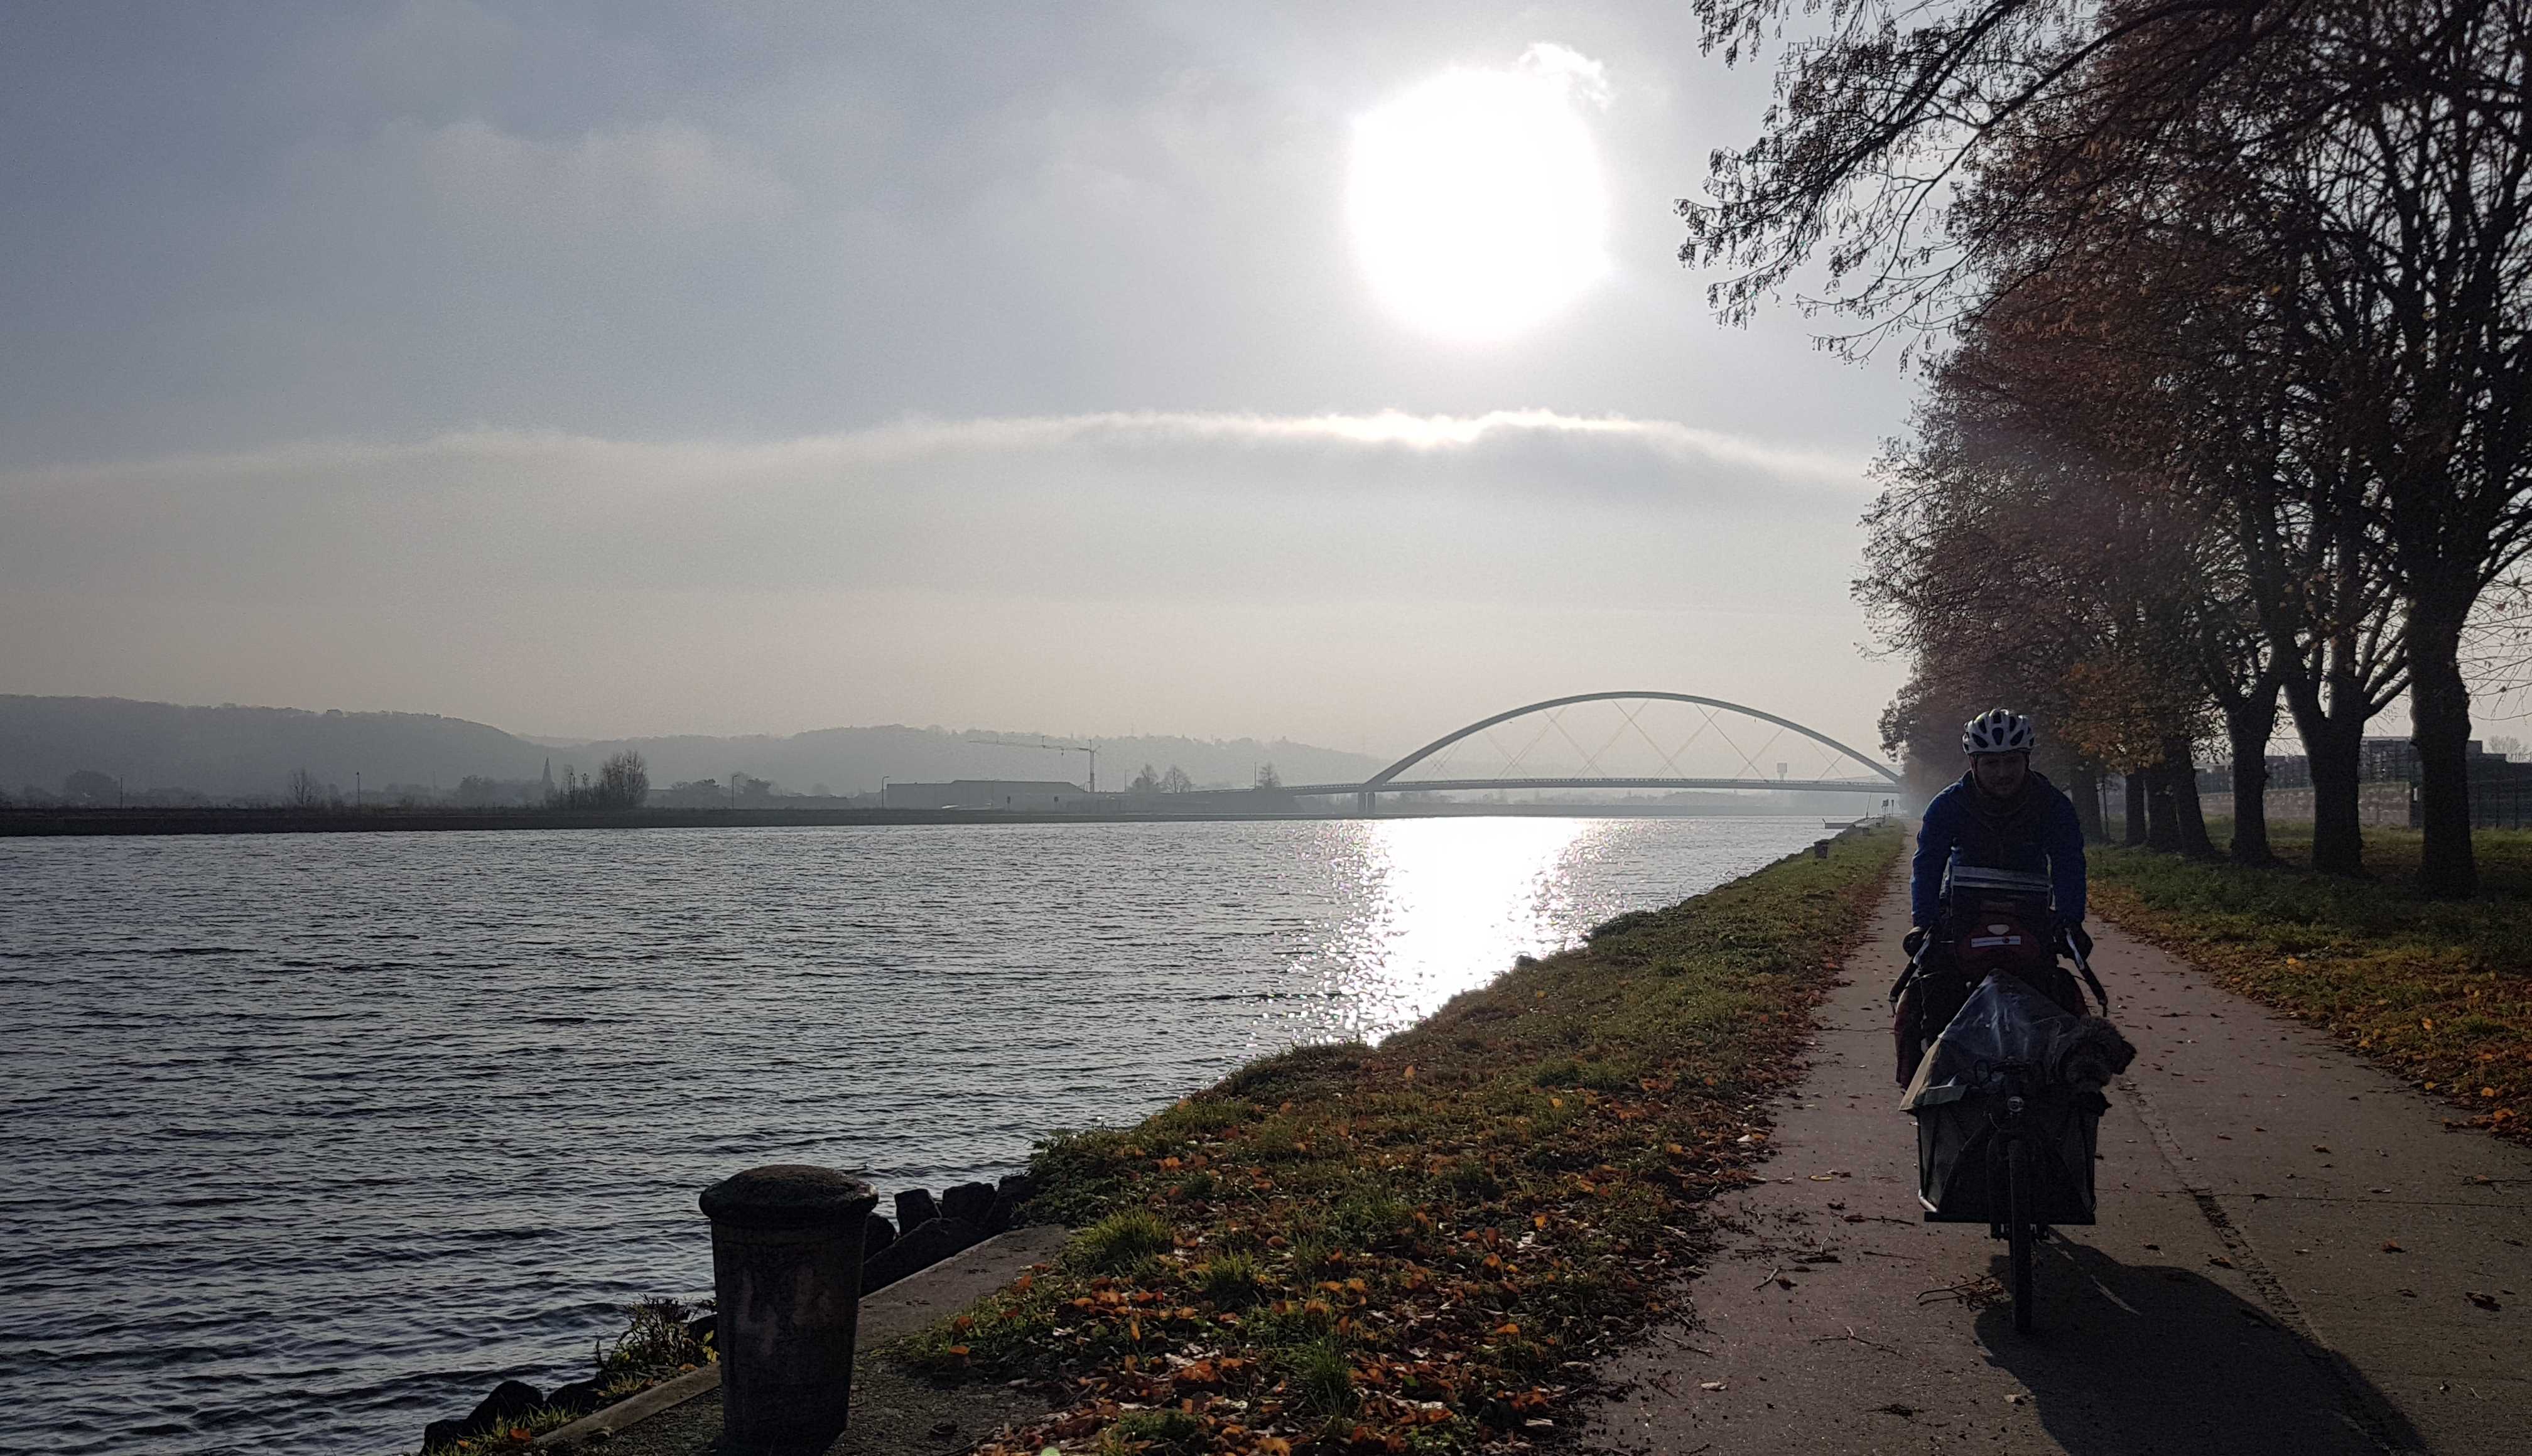 Following the river Meuse on the outskirts of Maastricht